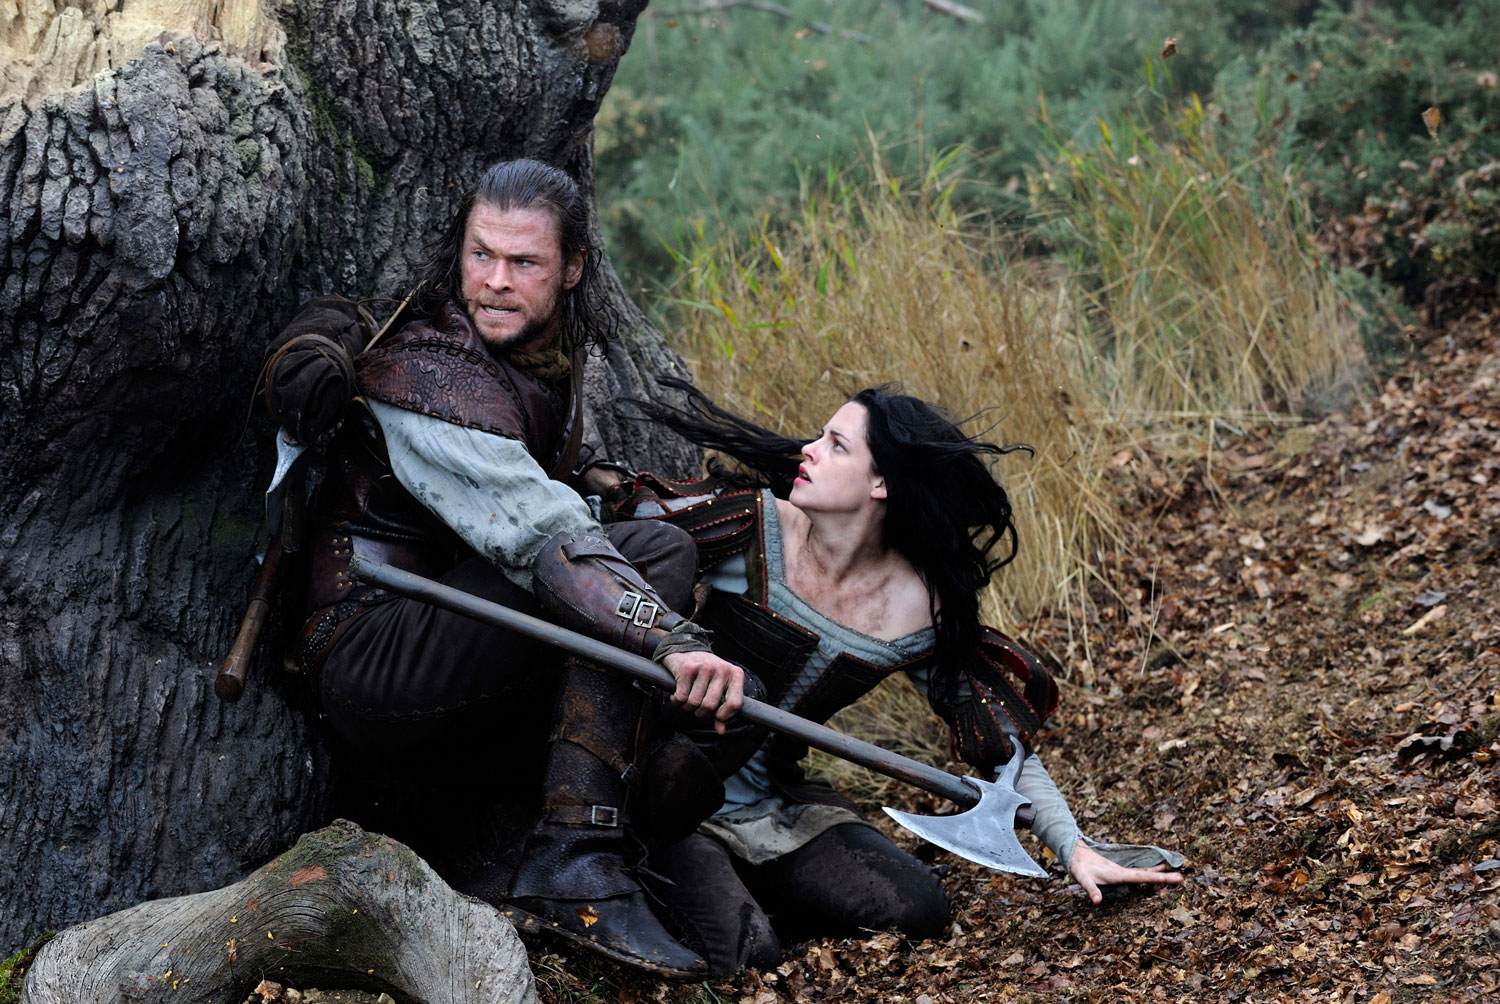 Snow White and the Huntsman movie review